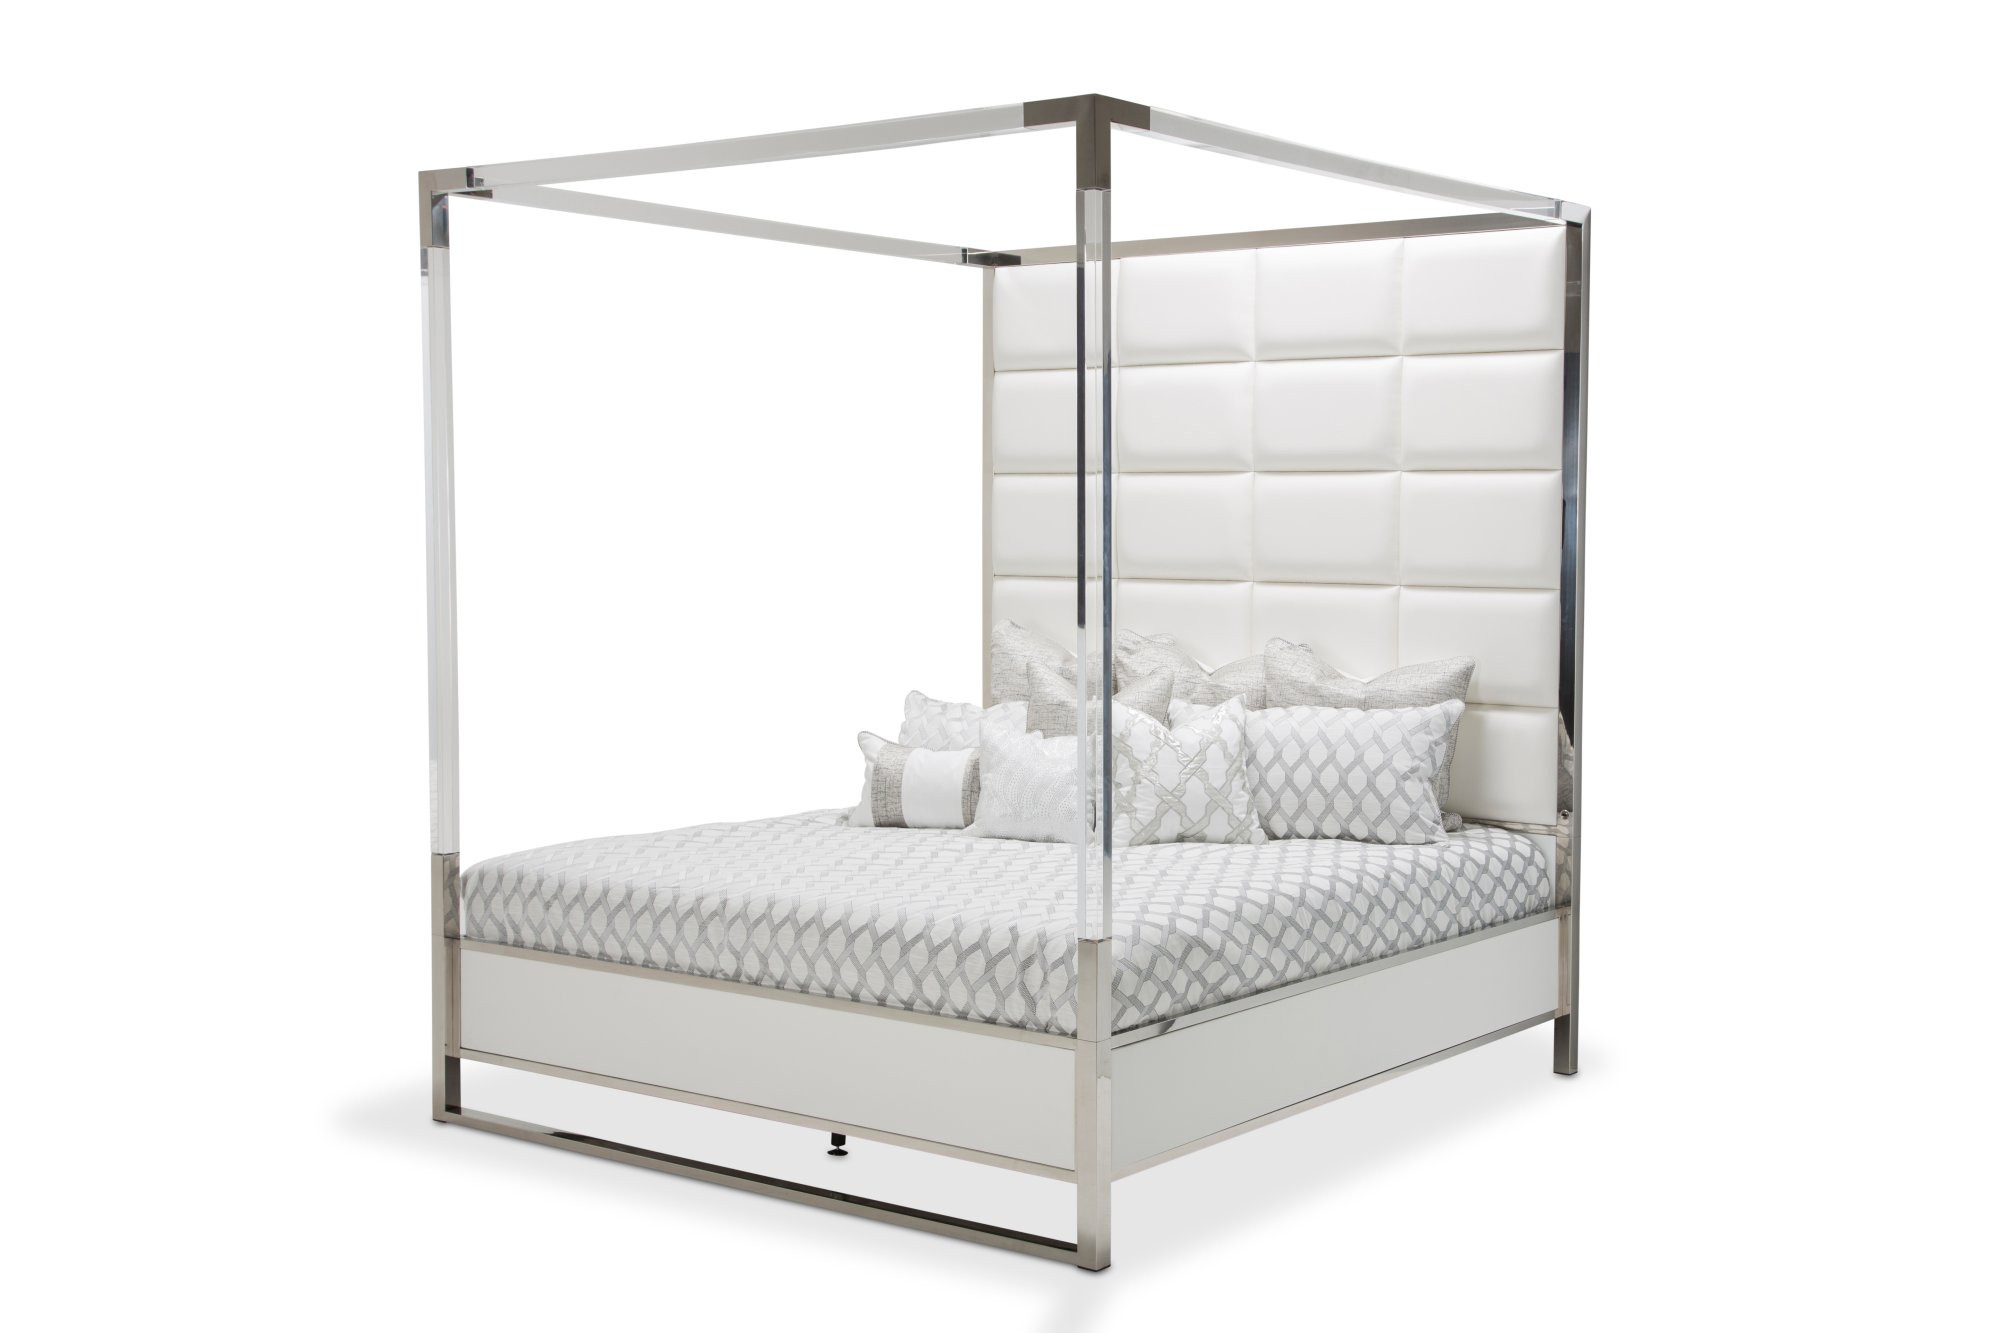 Cal King Metal Canopy Bed State, King Size Metal Canopy Bed Frame